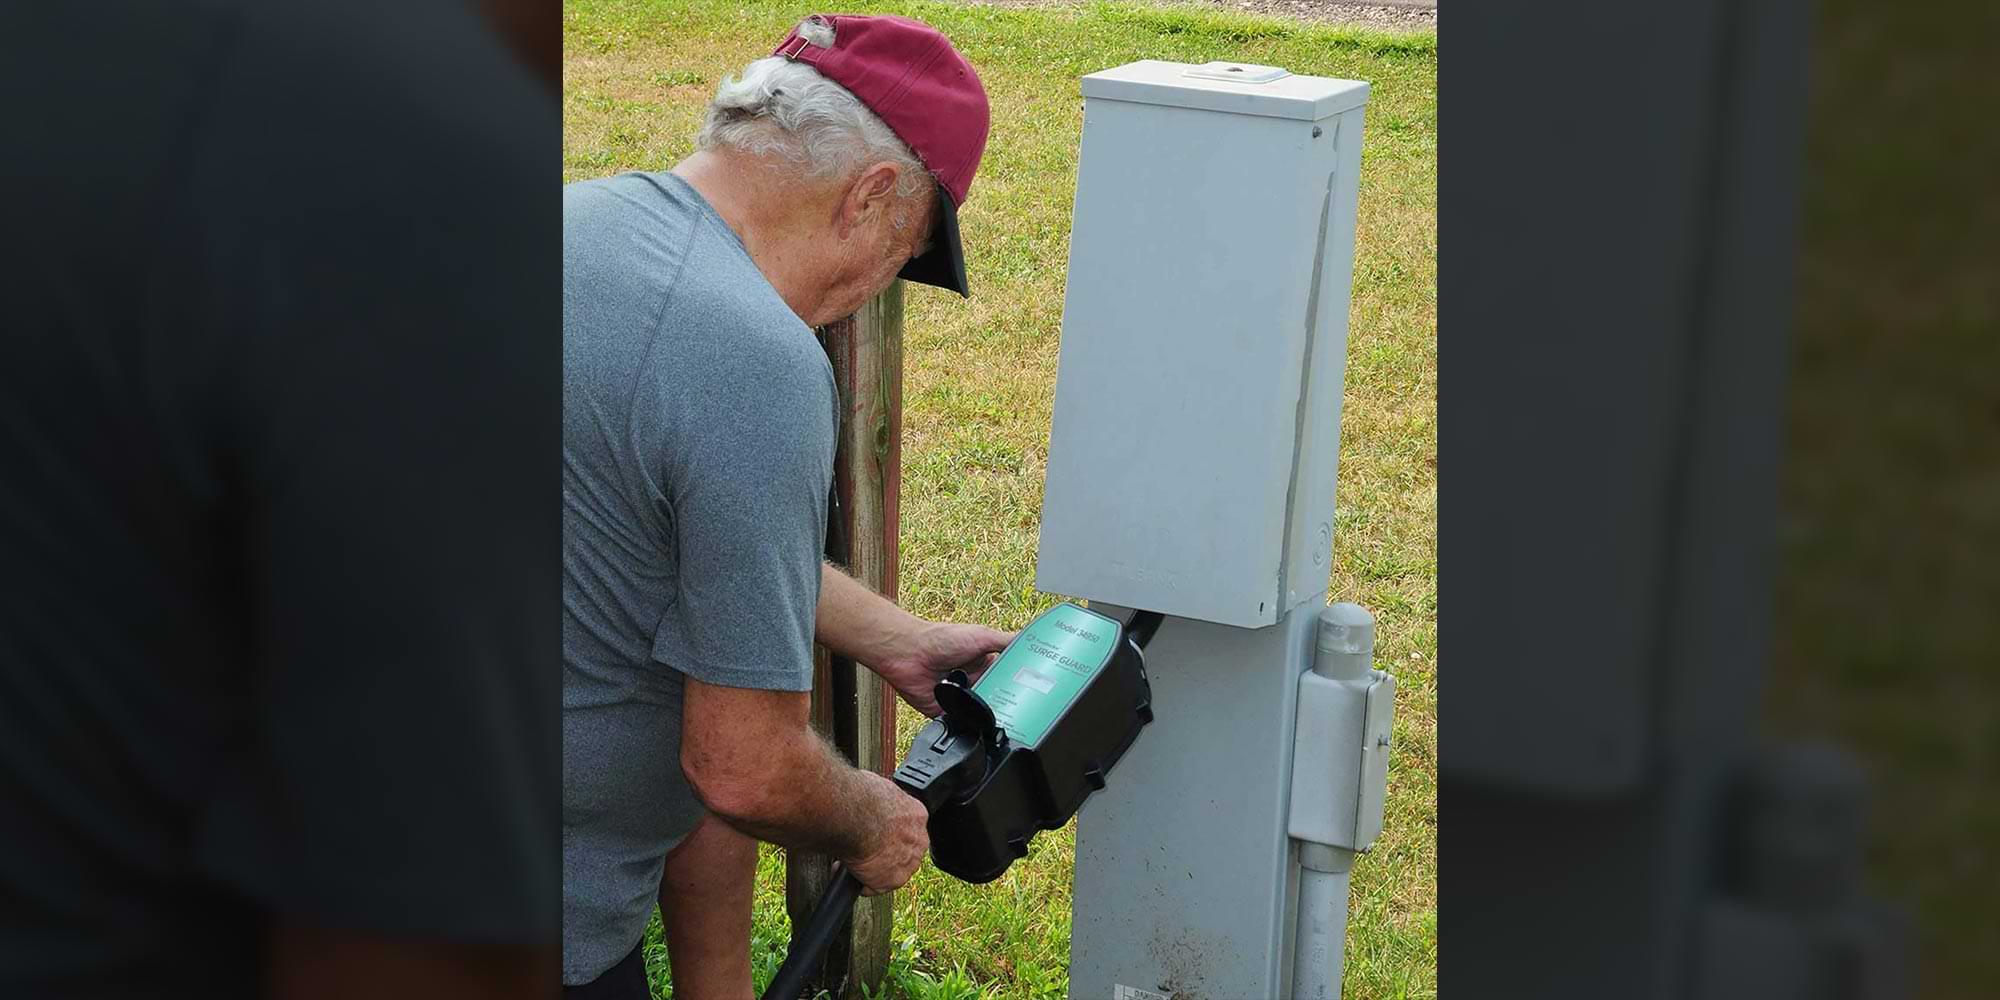 a man uses a surge guard on an outdoor electrical outlet